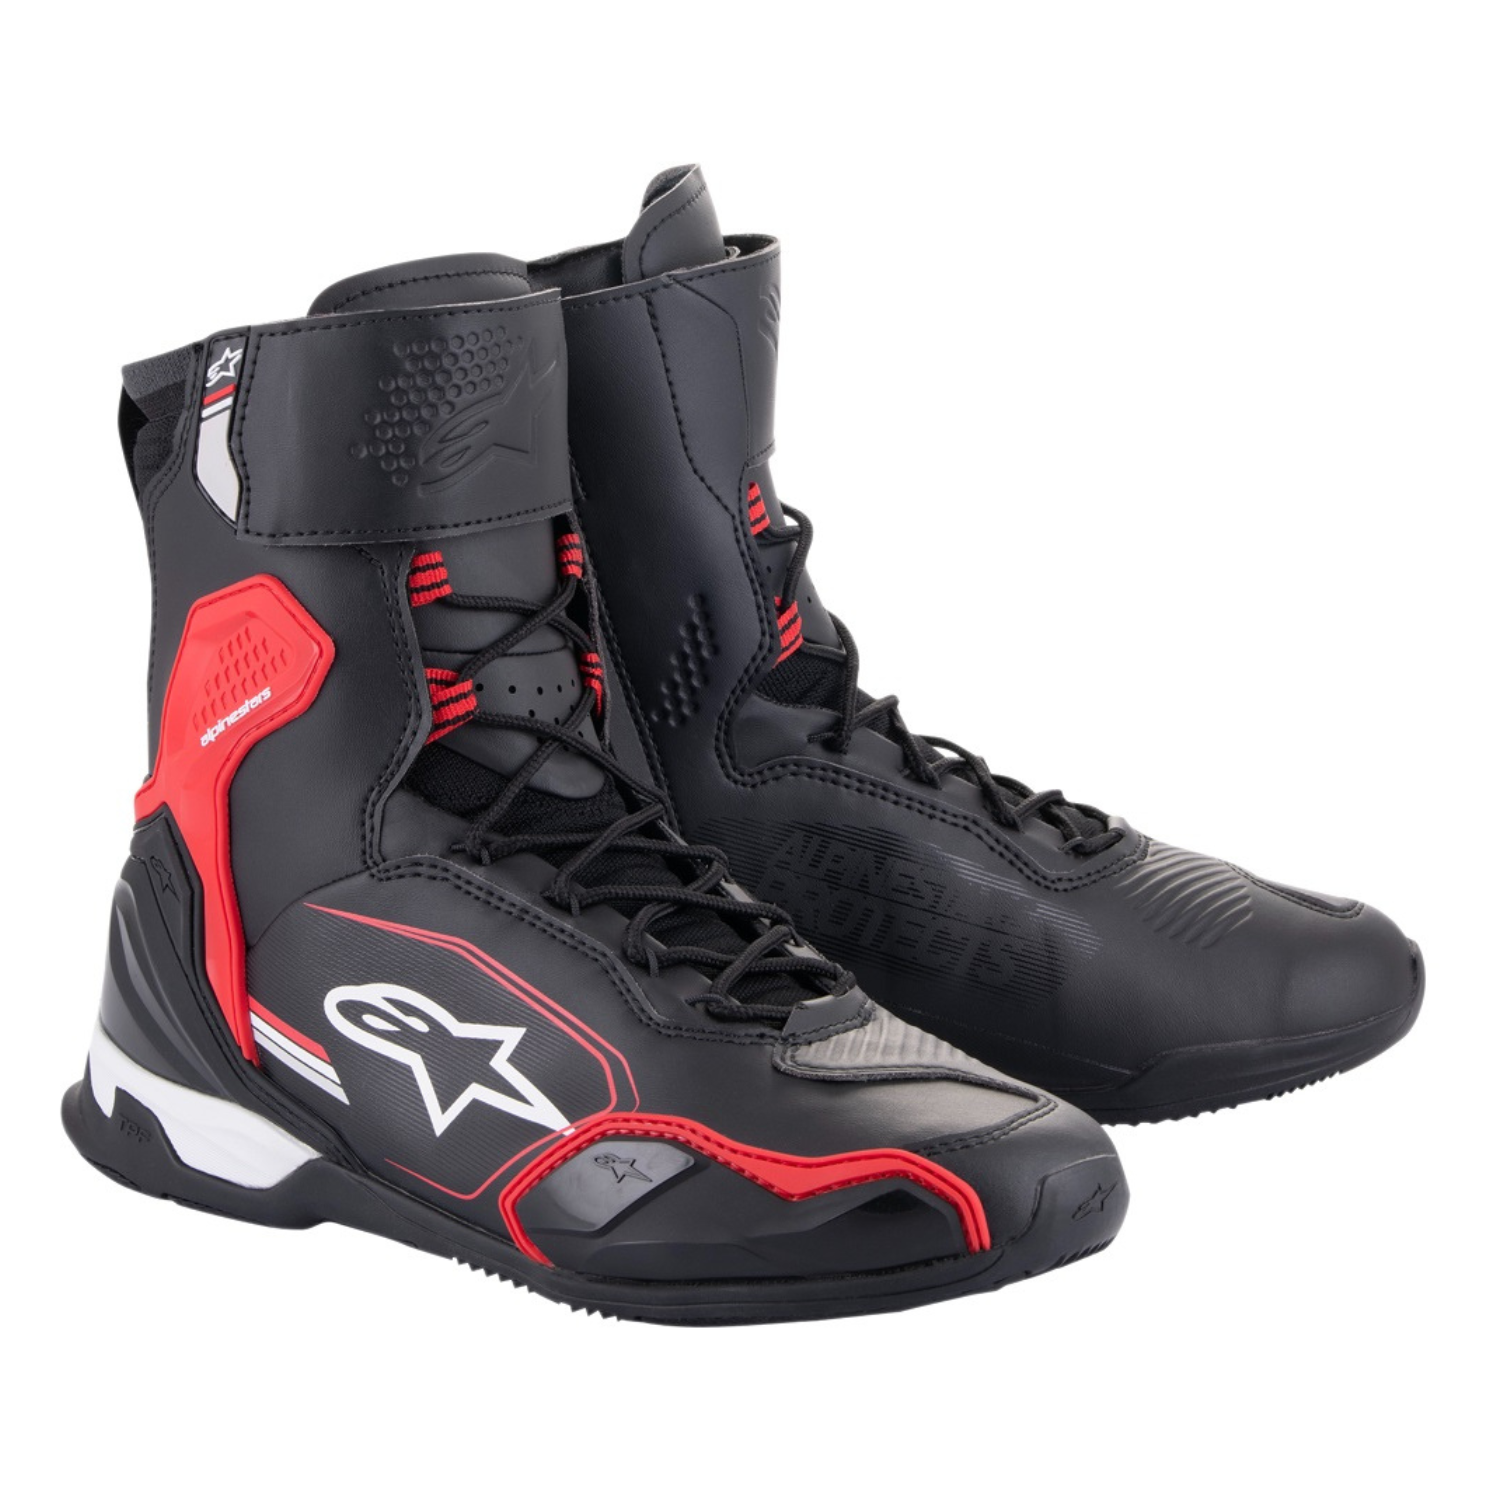 Image of Alpinestars Superfaster Shoes Black Bright Red White Size US 115 EN